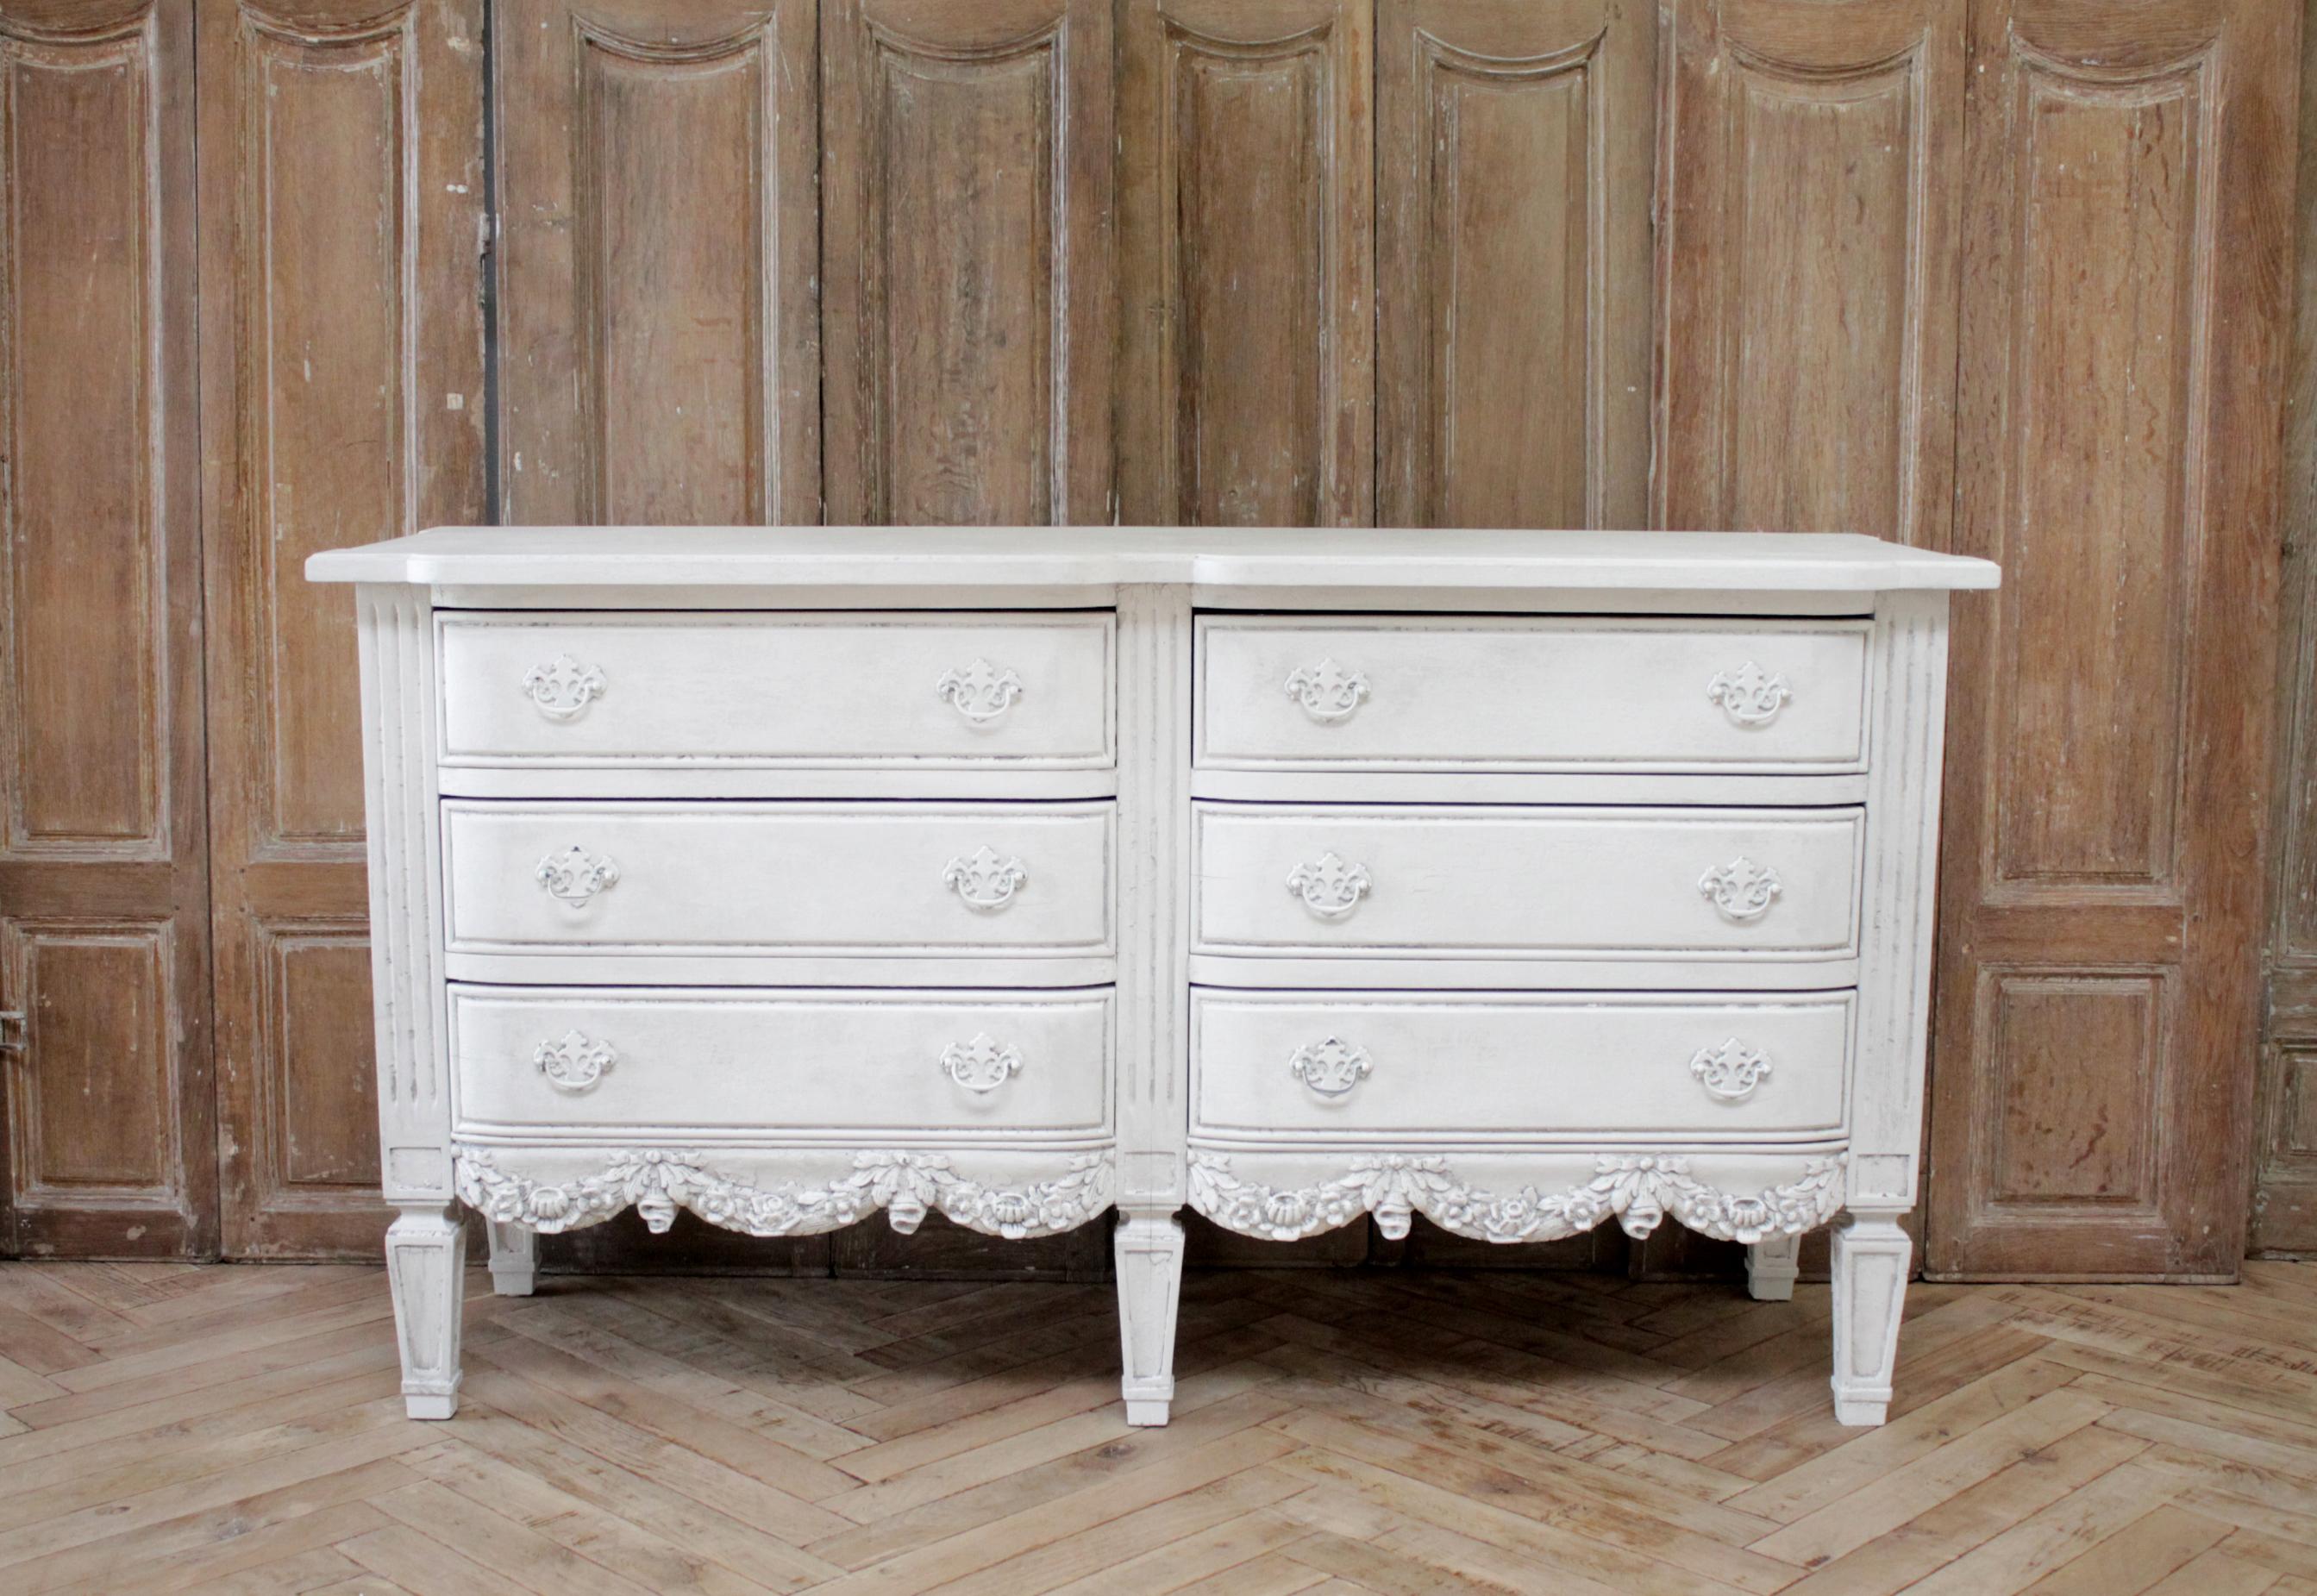 Vintage 6-drawer dresser with rose swag carvings
Painted in an off white finish, with an antique patina. The overall piece has a vintage finish (see photos) the flat surfaces have a cracklure appearance. 
Measures: 62.5